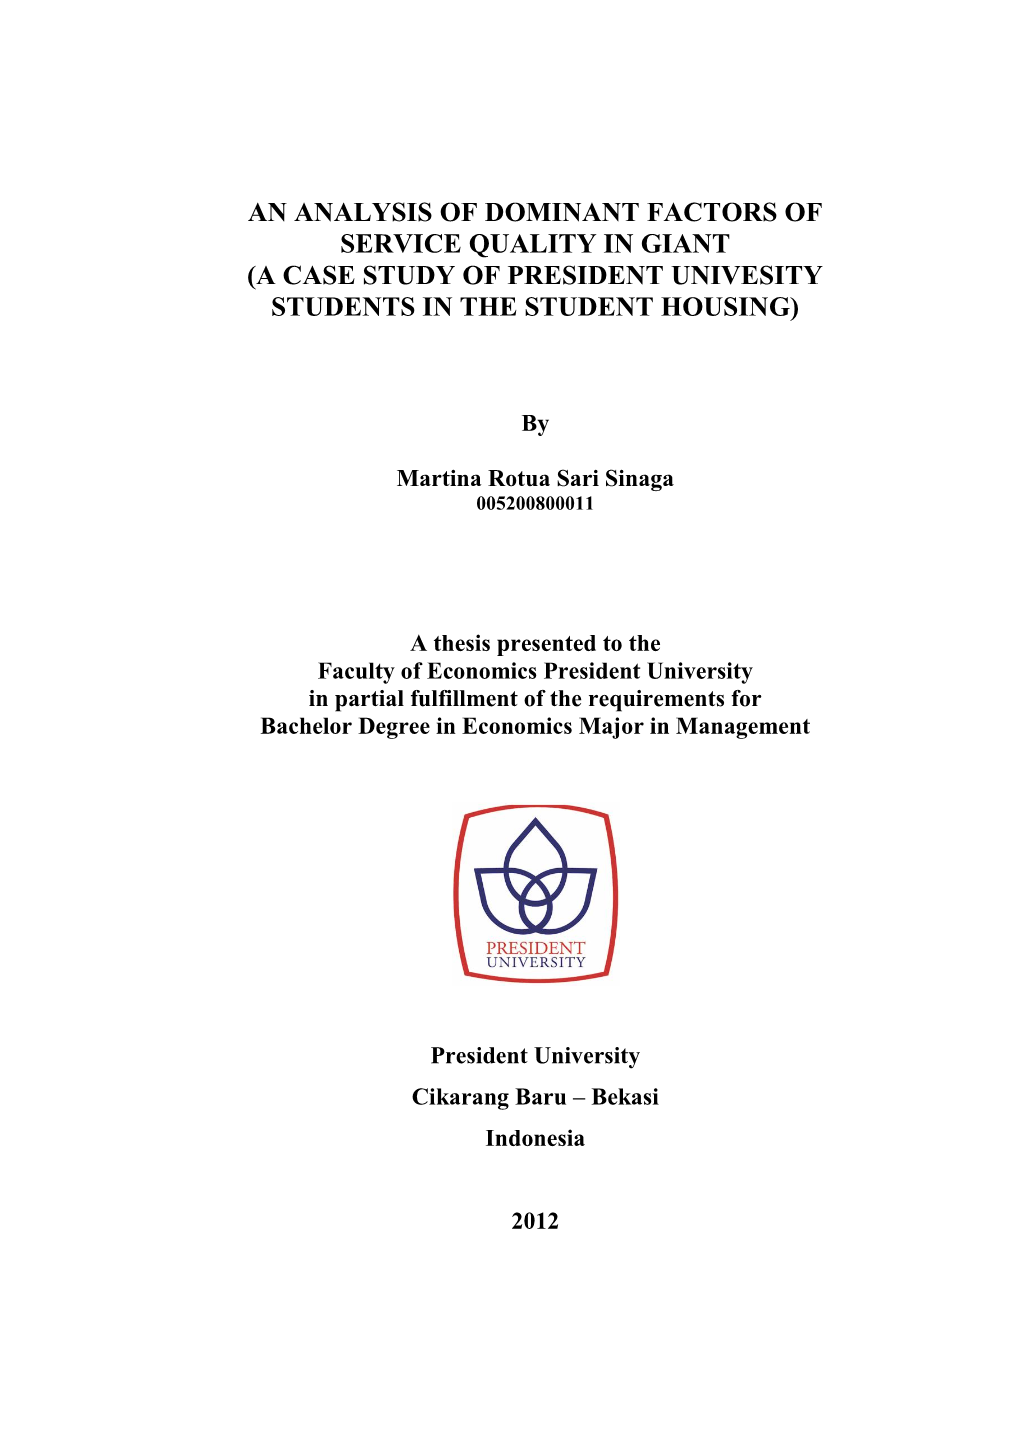 An Analysis of Dominant Factors of Service Quality in Giant (A Case Study of President Univesity Students in the Student Housing)